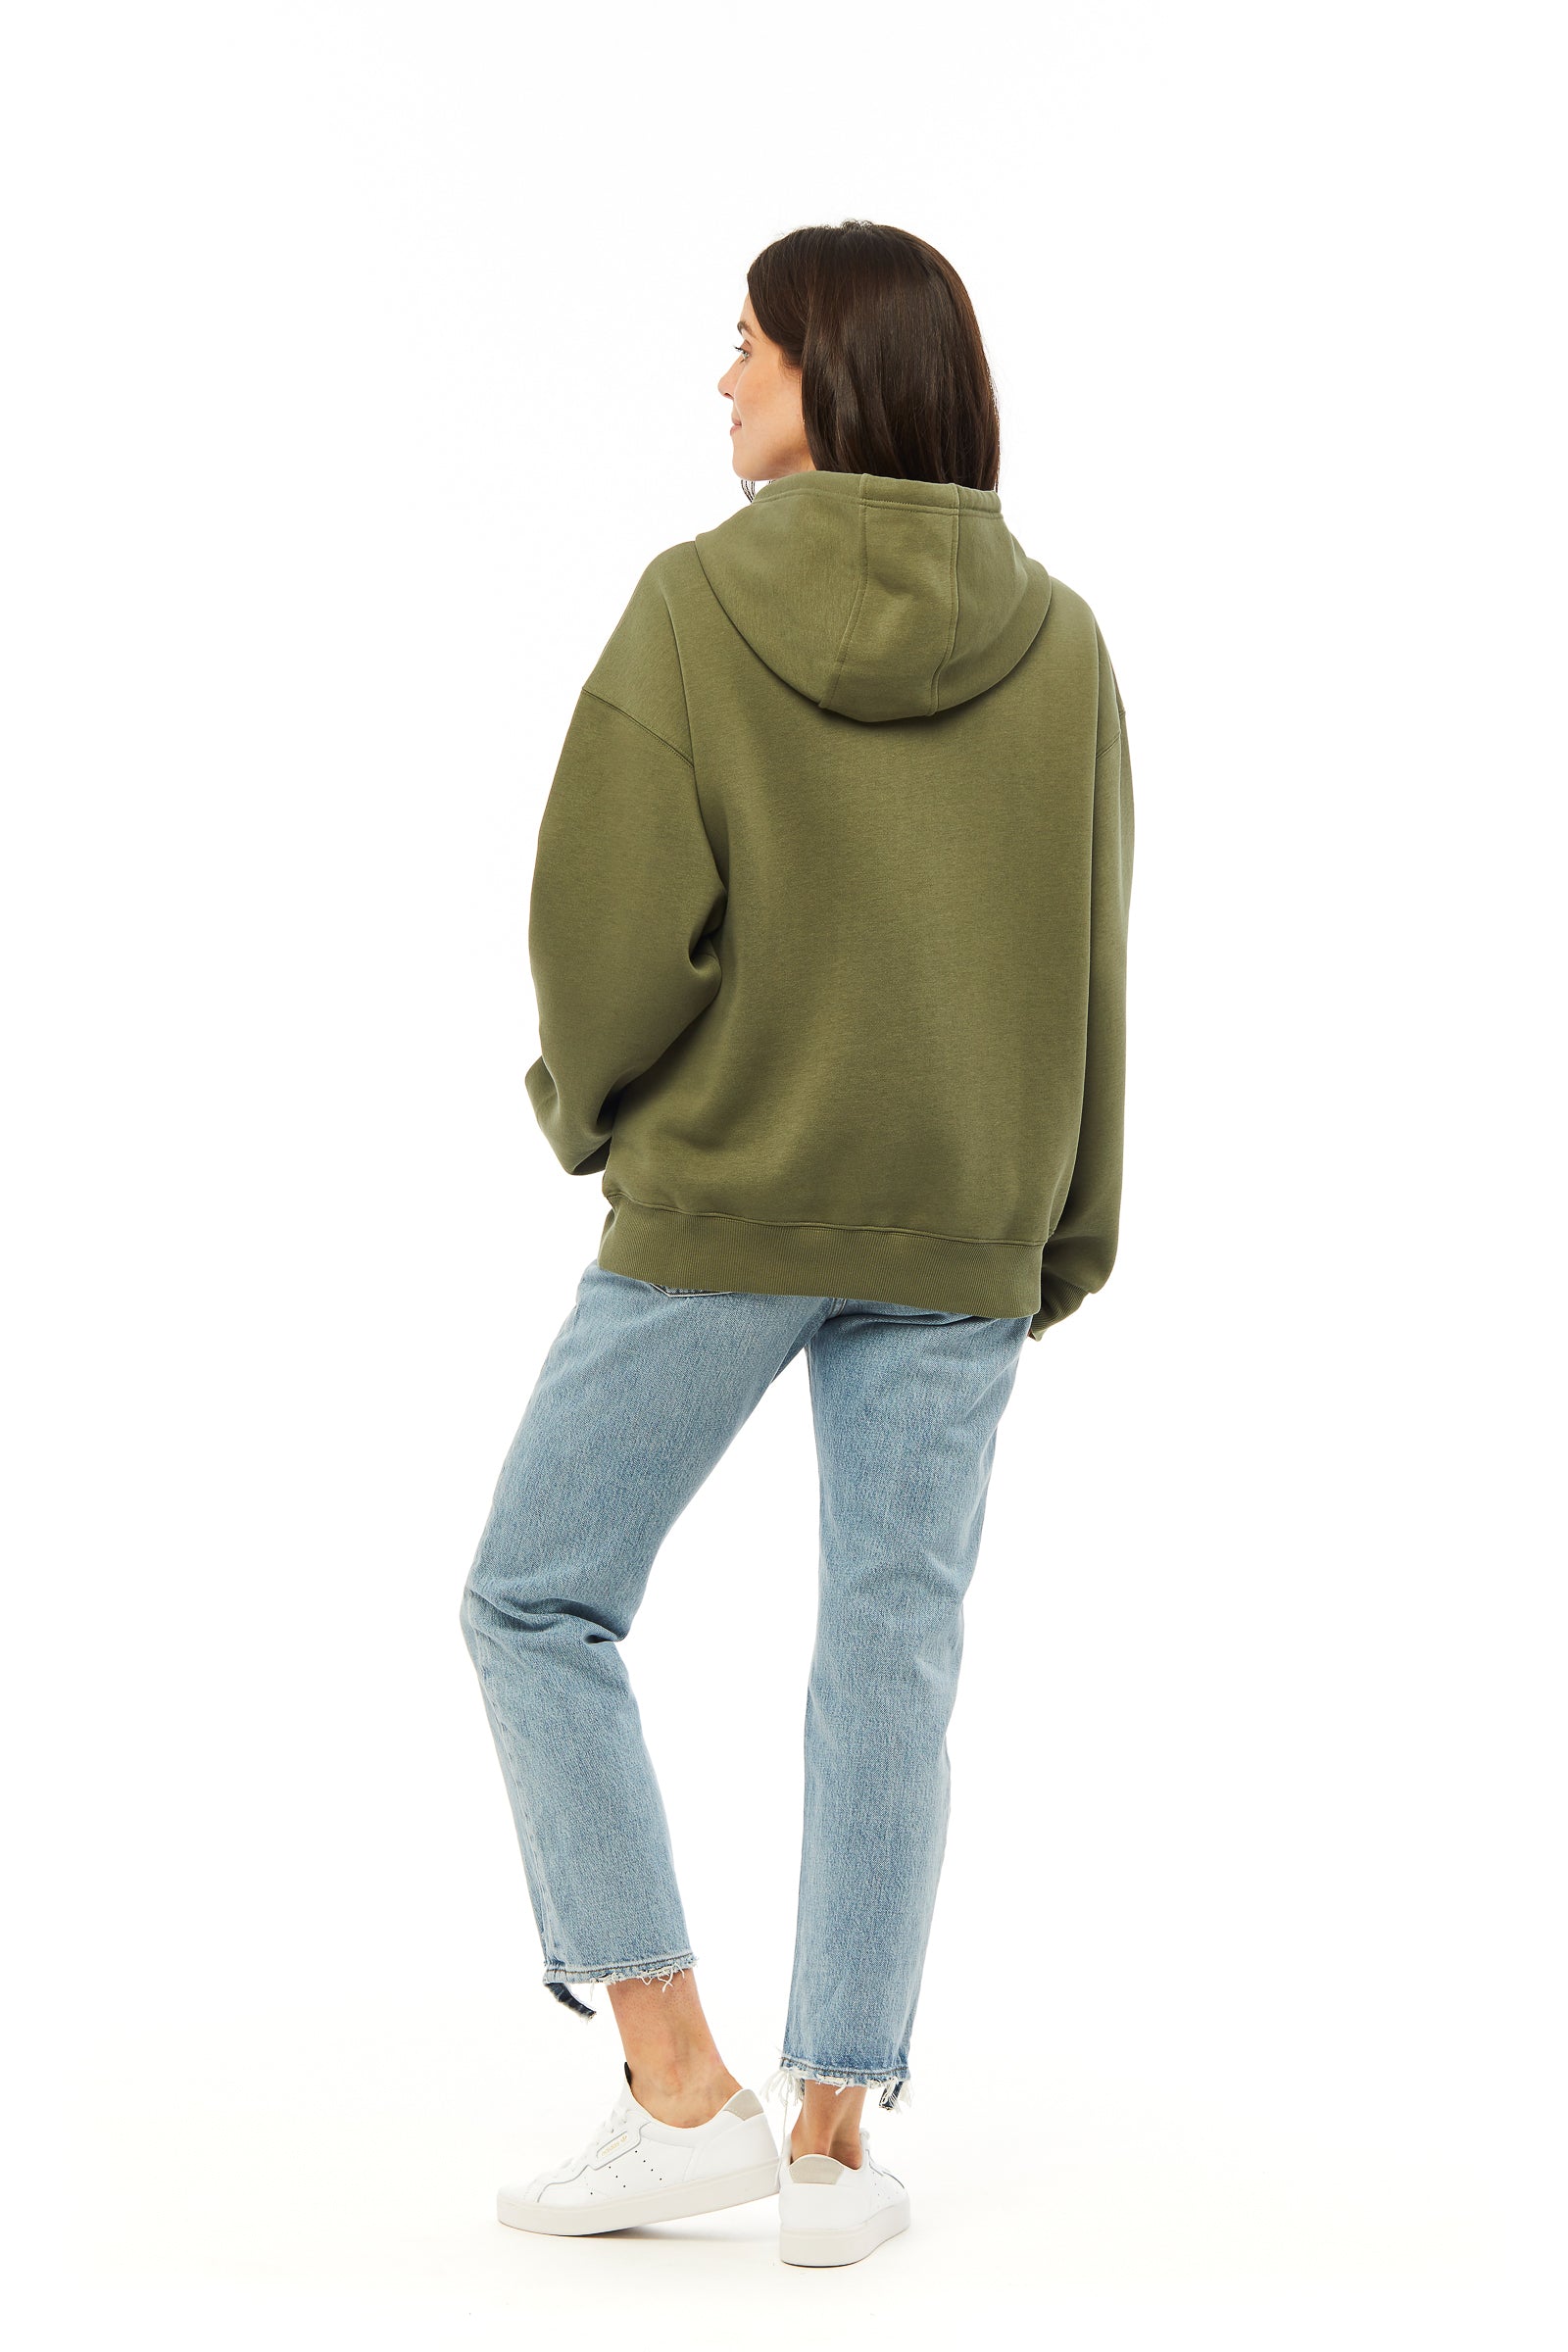 Cheeky relaxed hoodie in olive